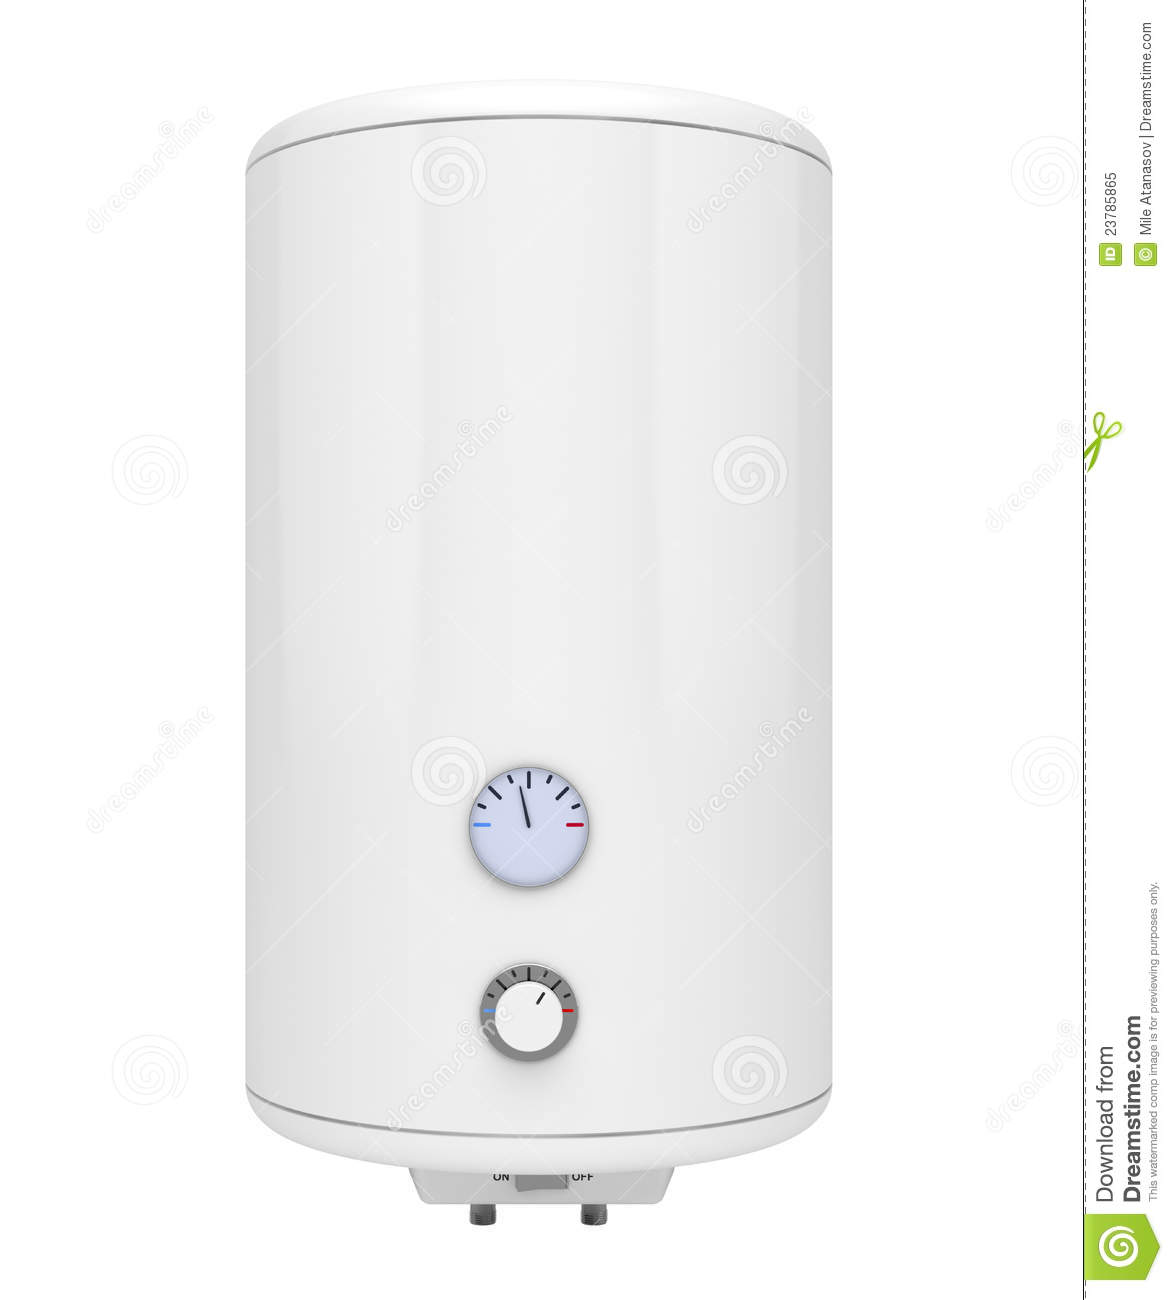 Water Heater Royalty Free Stock Photo   Image  23785865